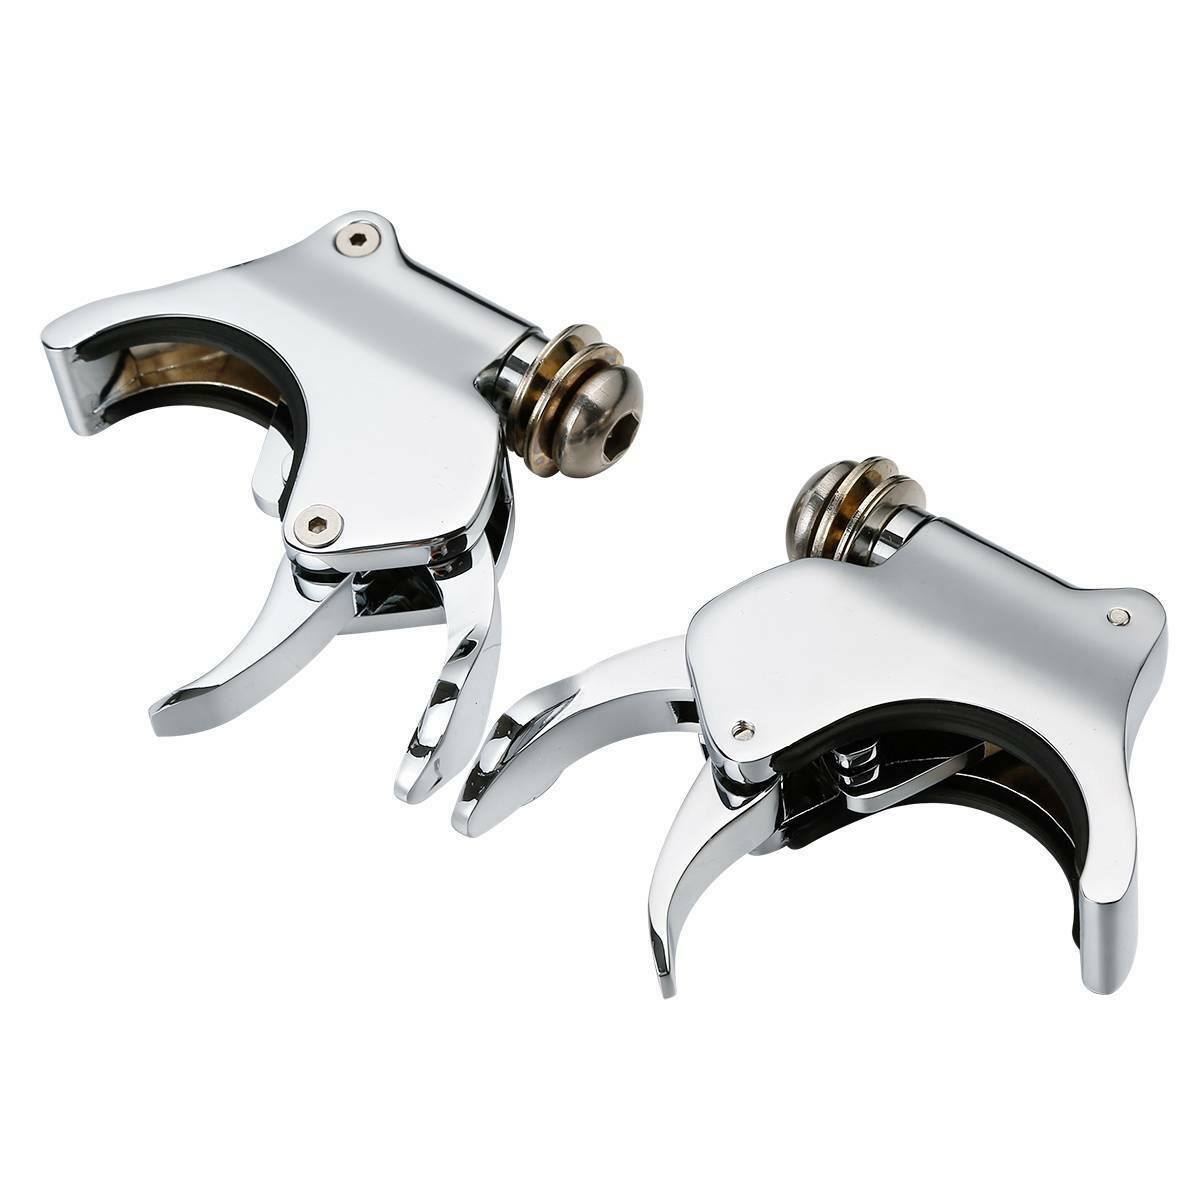 41mm Windshield Clamps Fit For Harley Dyna Wide Glide 93-05 Softail 88-13 Chrome - Moto Life Products